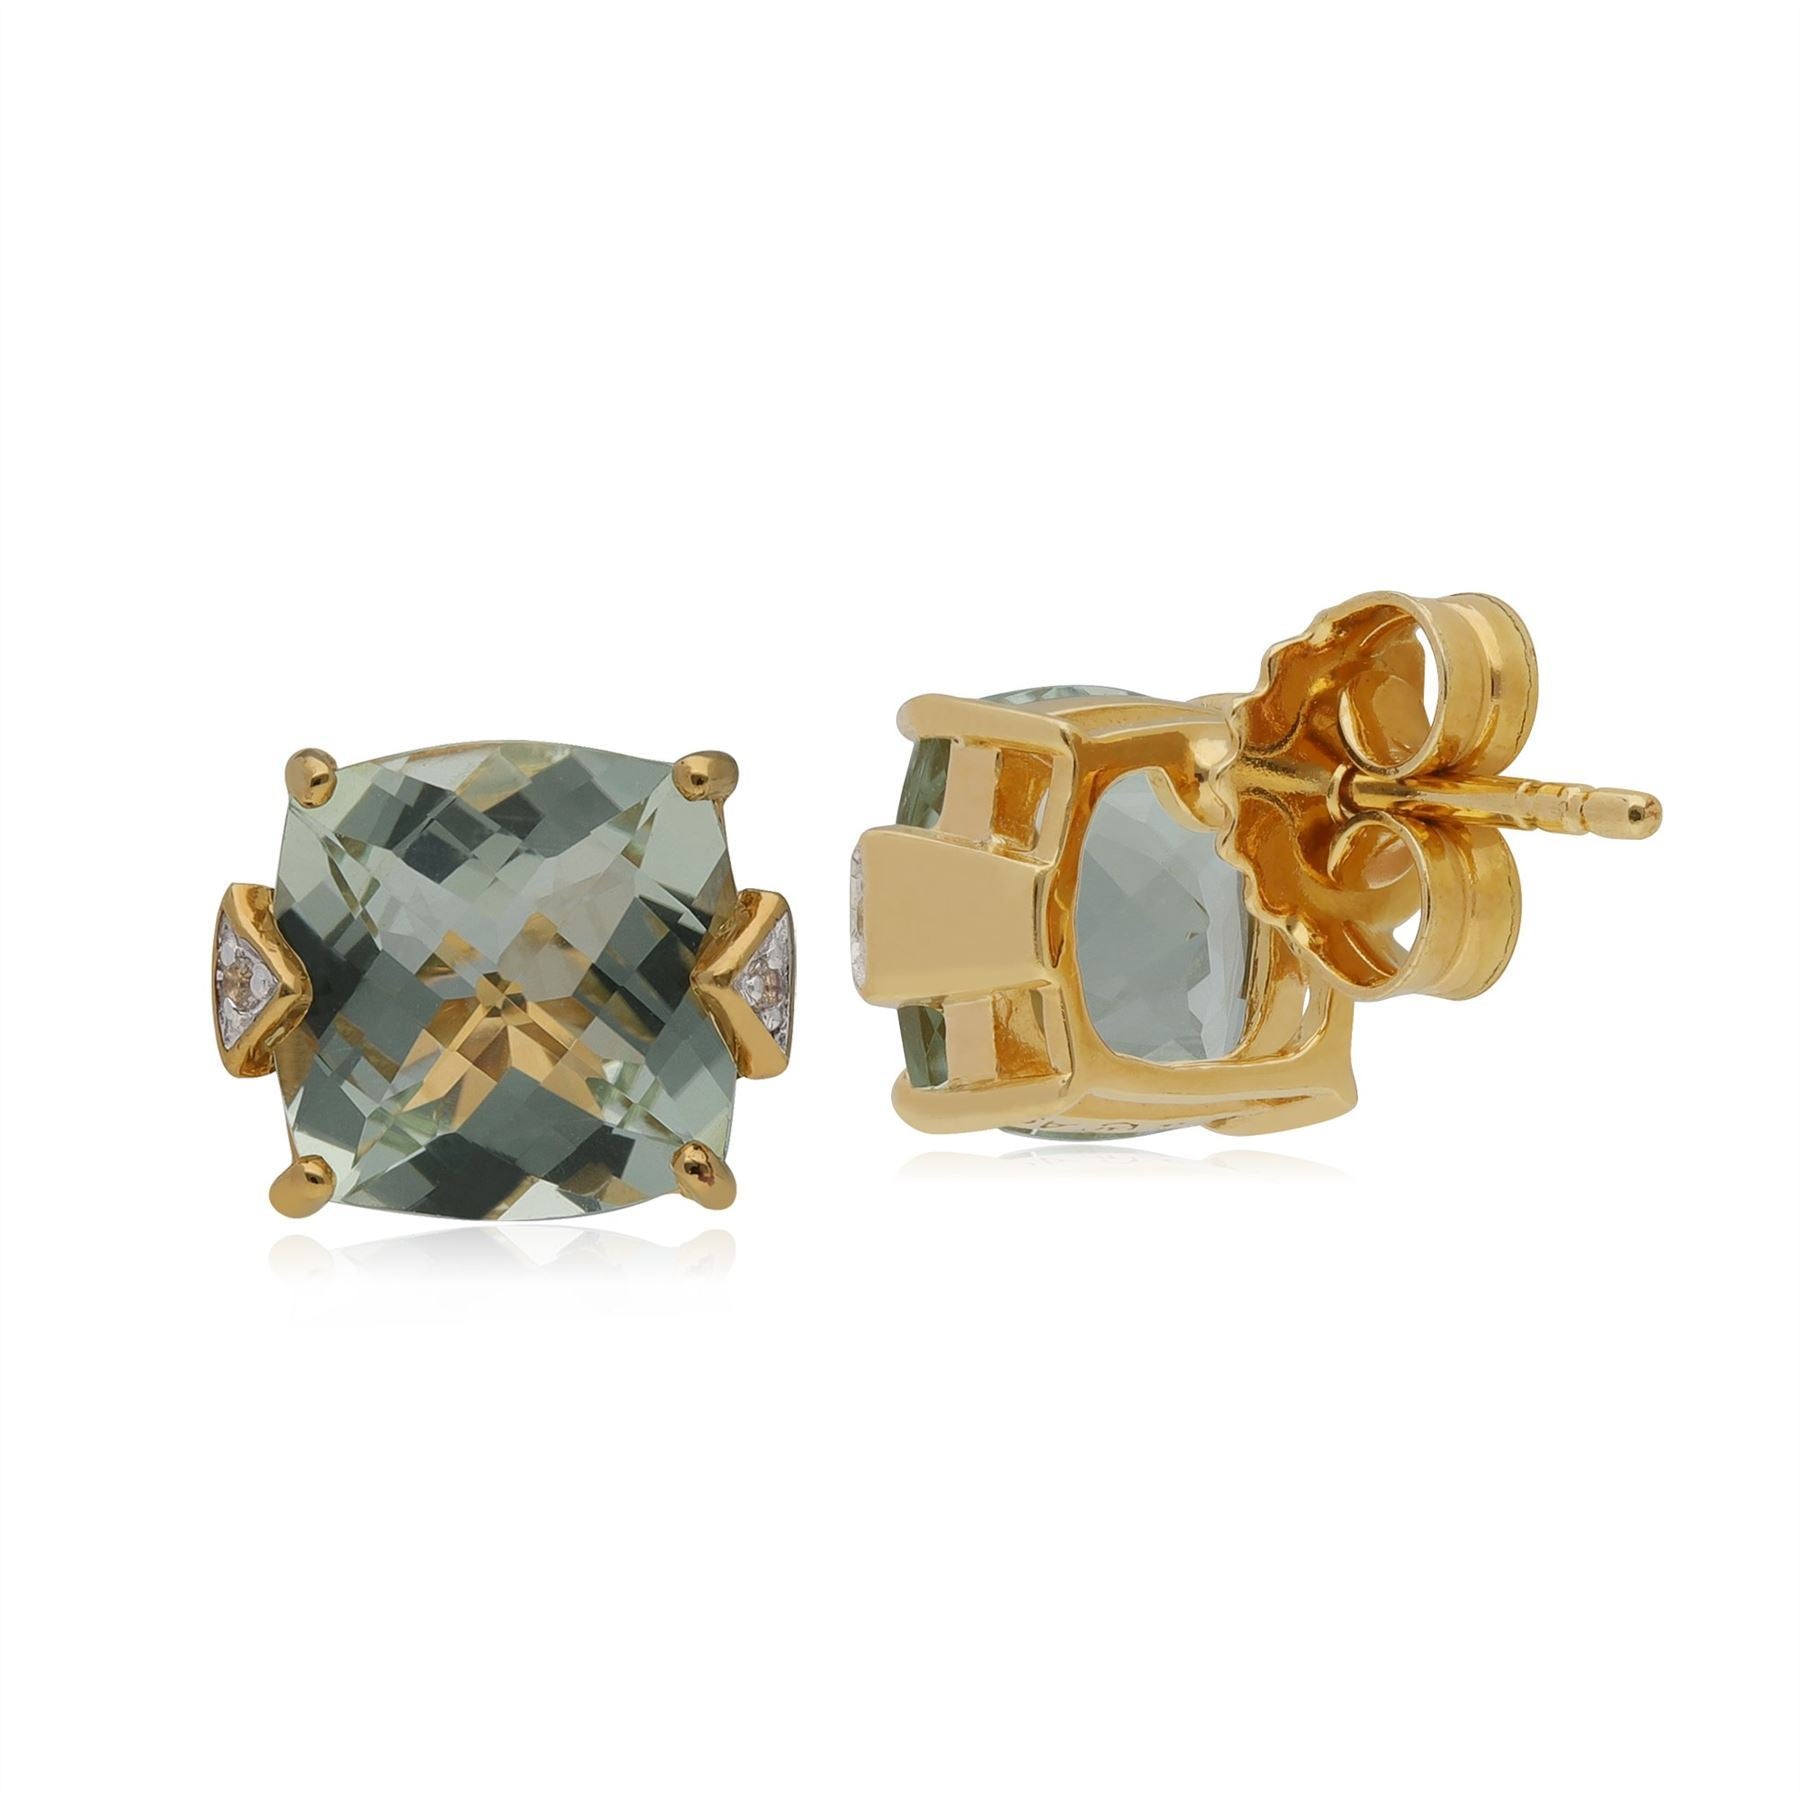 Kosmos Green Mint Quartz & Topaz Stud Earrings in Rose Gold Plated Sterling Silver